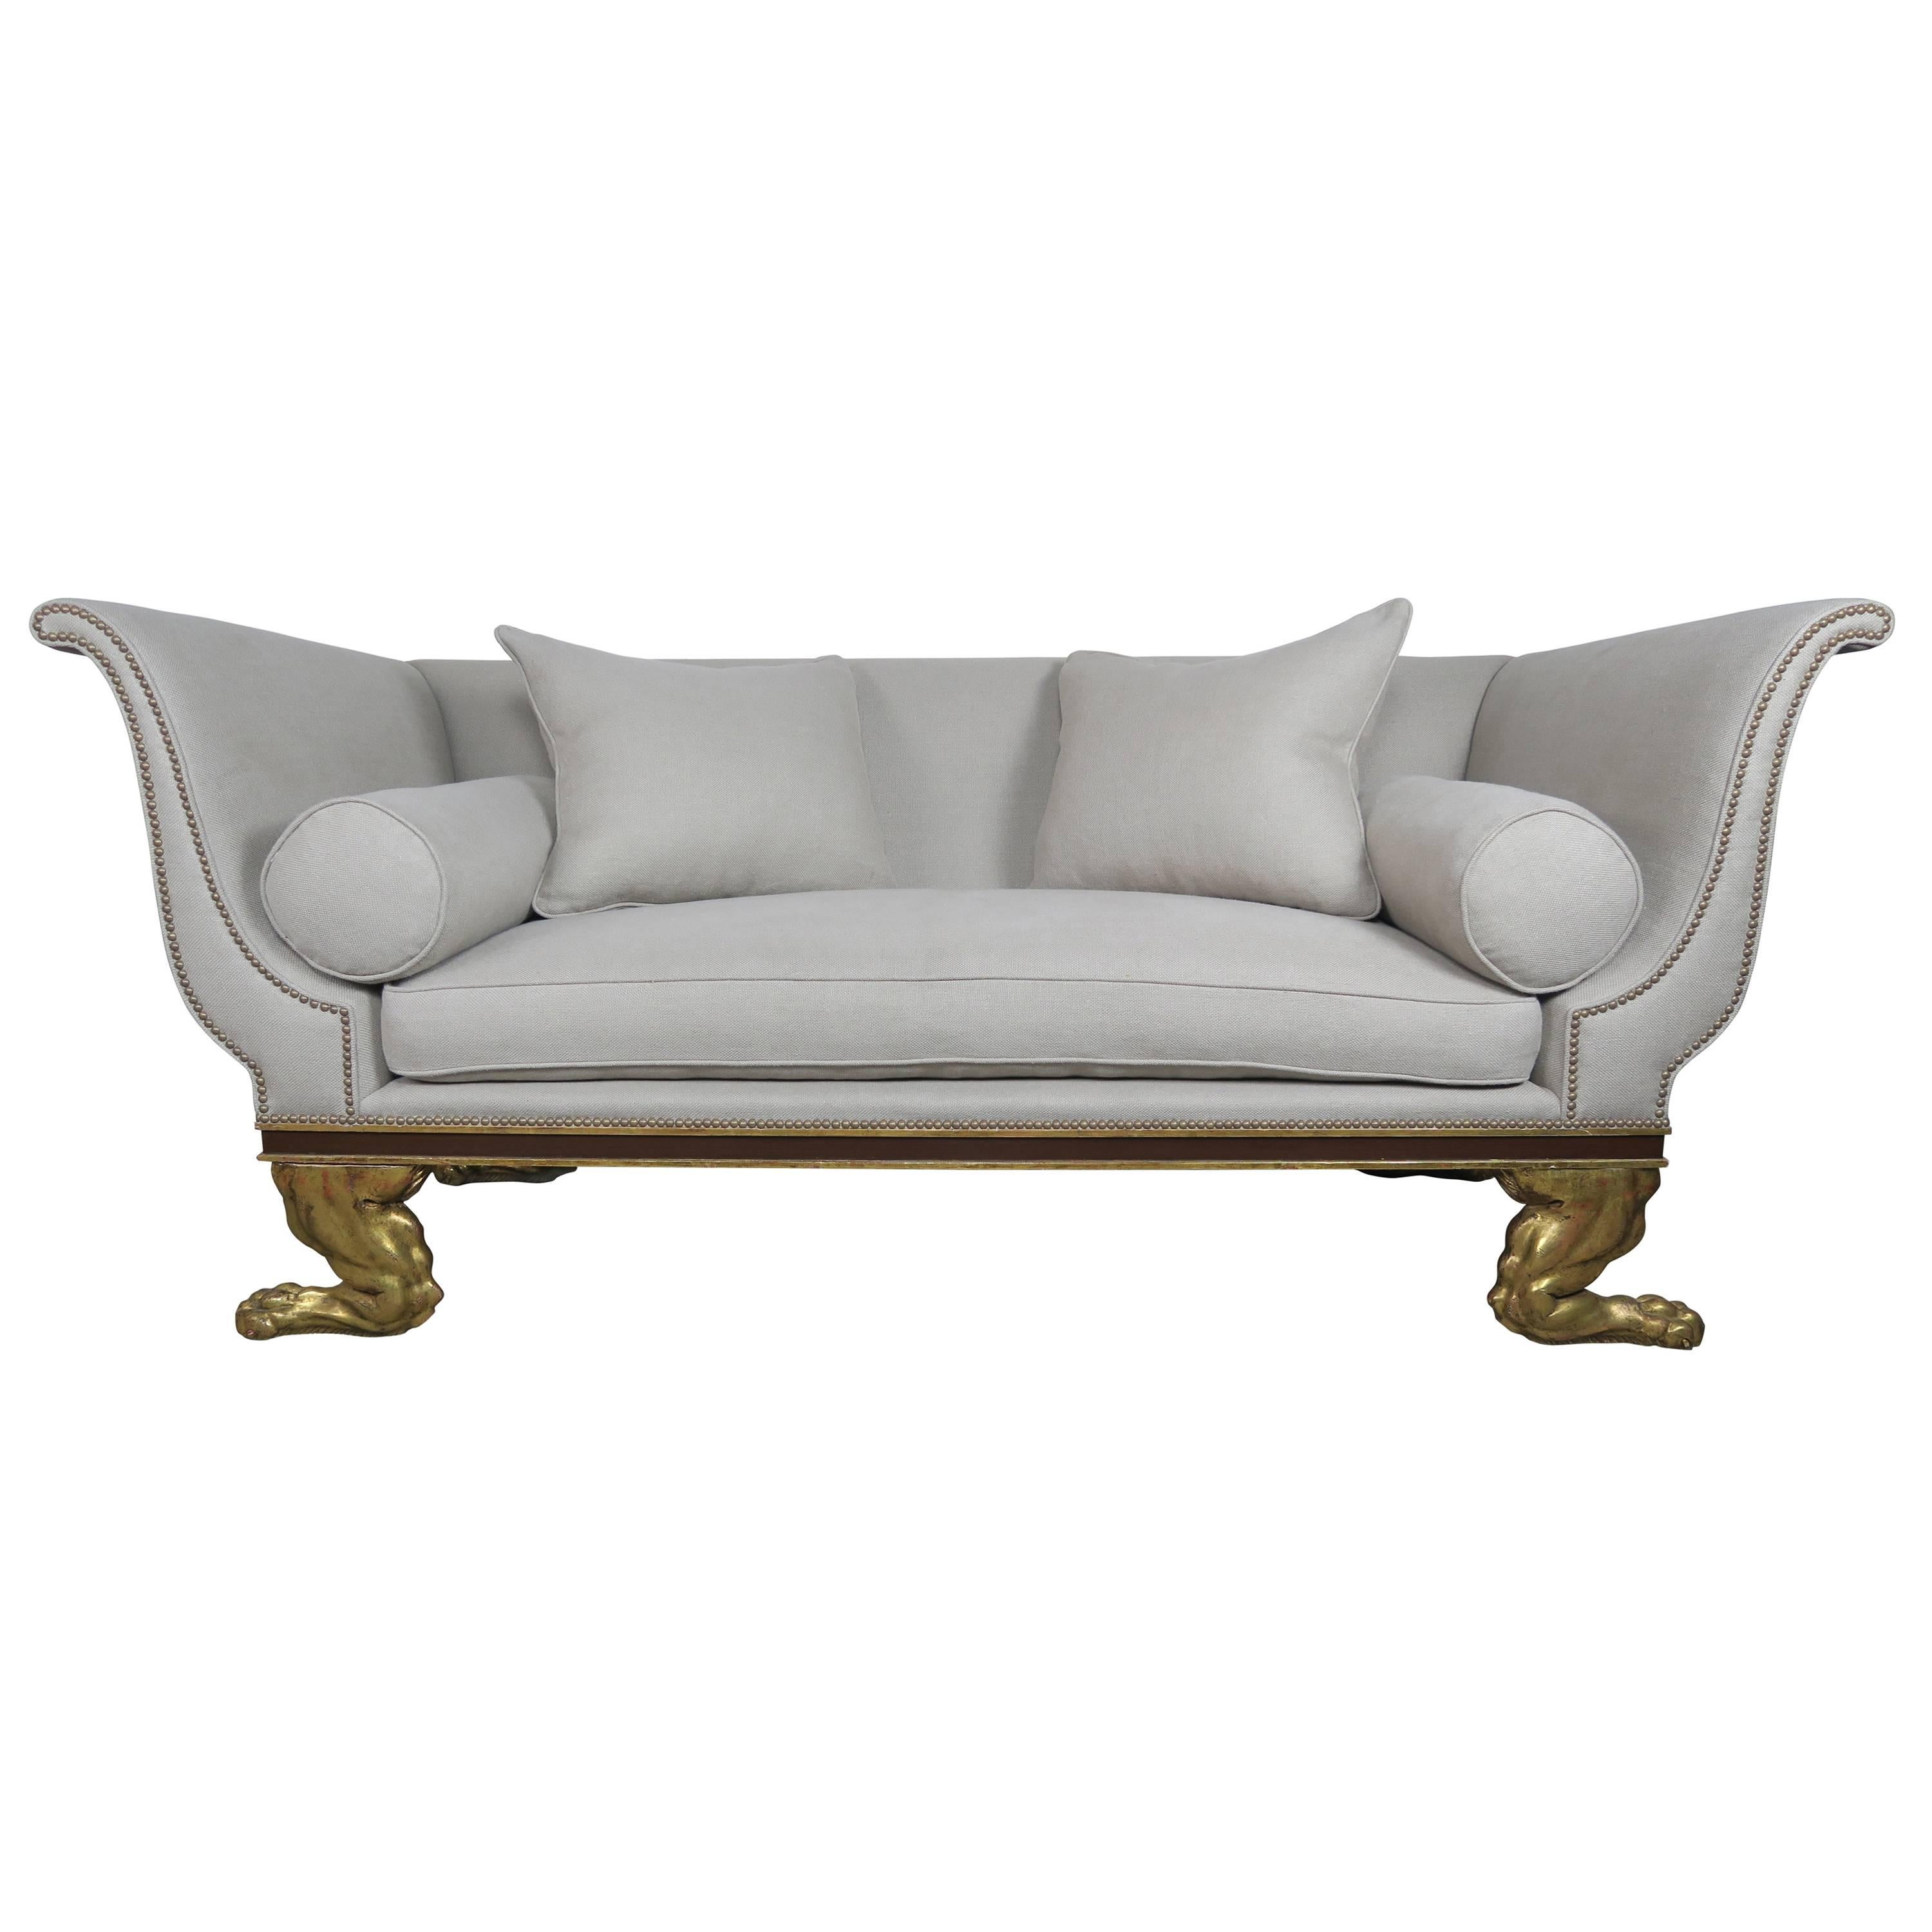 Regency Style Linen Upholstered Sofa with Giltwood Feet